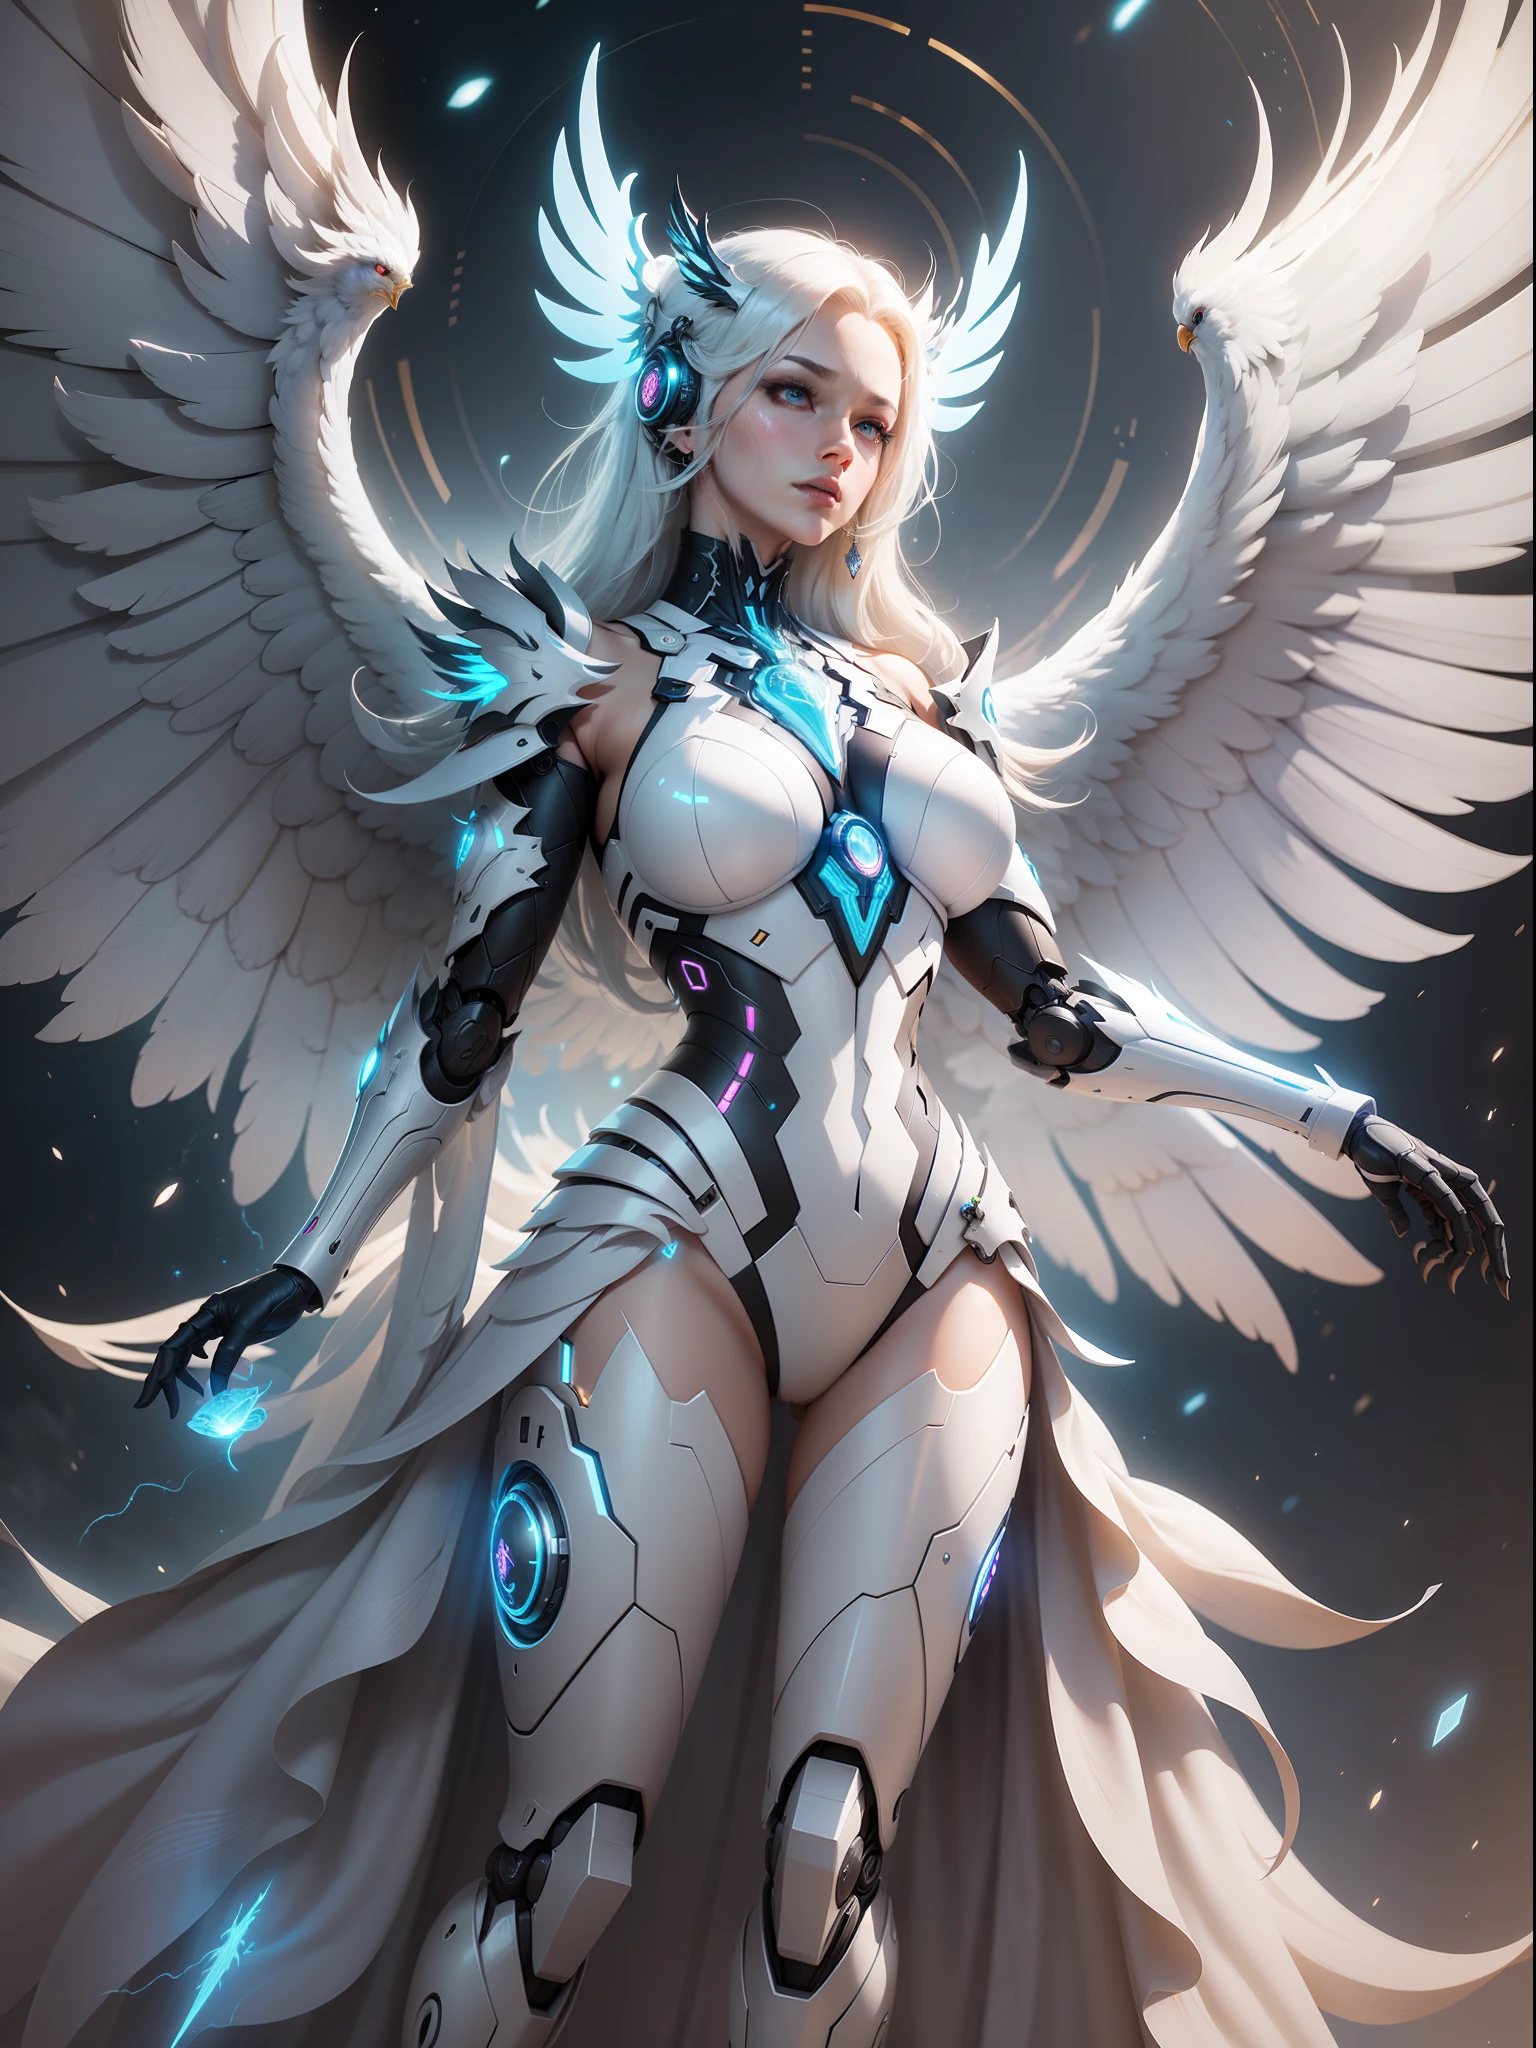 there is a large white angel with wings spread out, glowing angelic being, big white glowing wings, ethereal wings, epic angel wings, infinite angelic wings, cosmic horror entity with wings, futuristic robot angel, unreal engine render + a goddess, wings made of light, the solarpunk phoenix, akihiko yoshida. unreal engine, stunning cgsociety